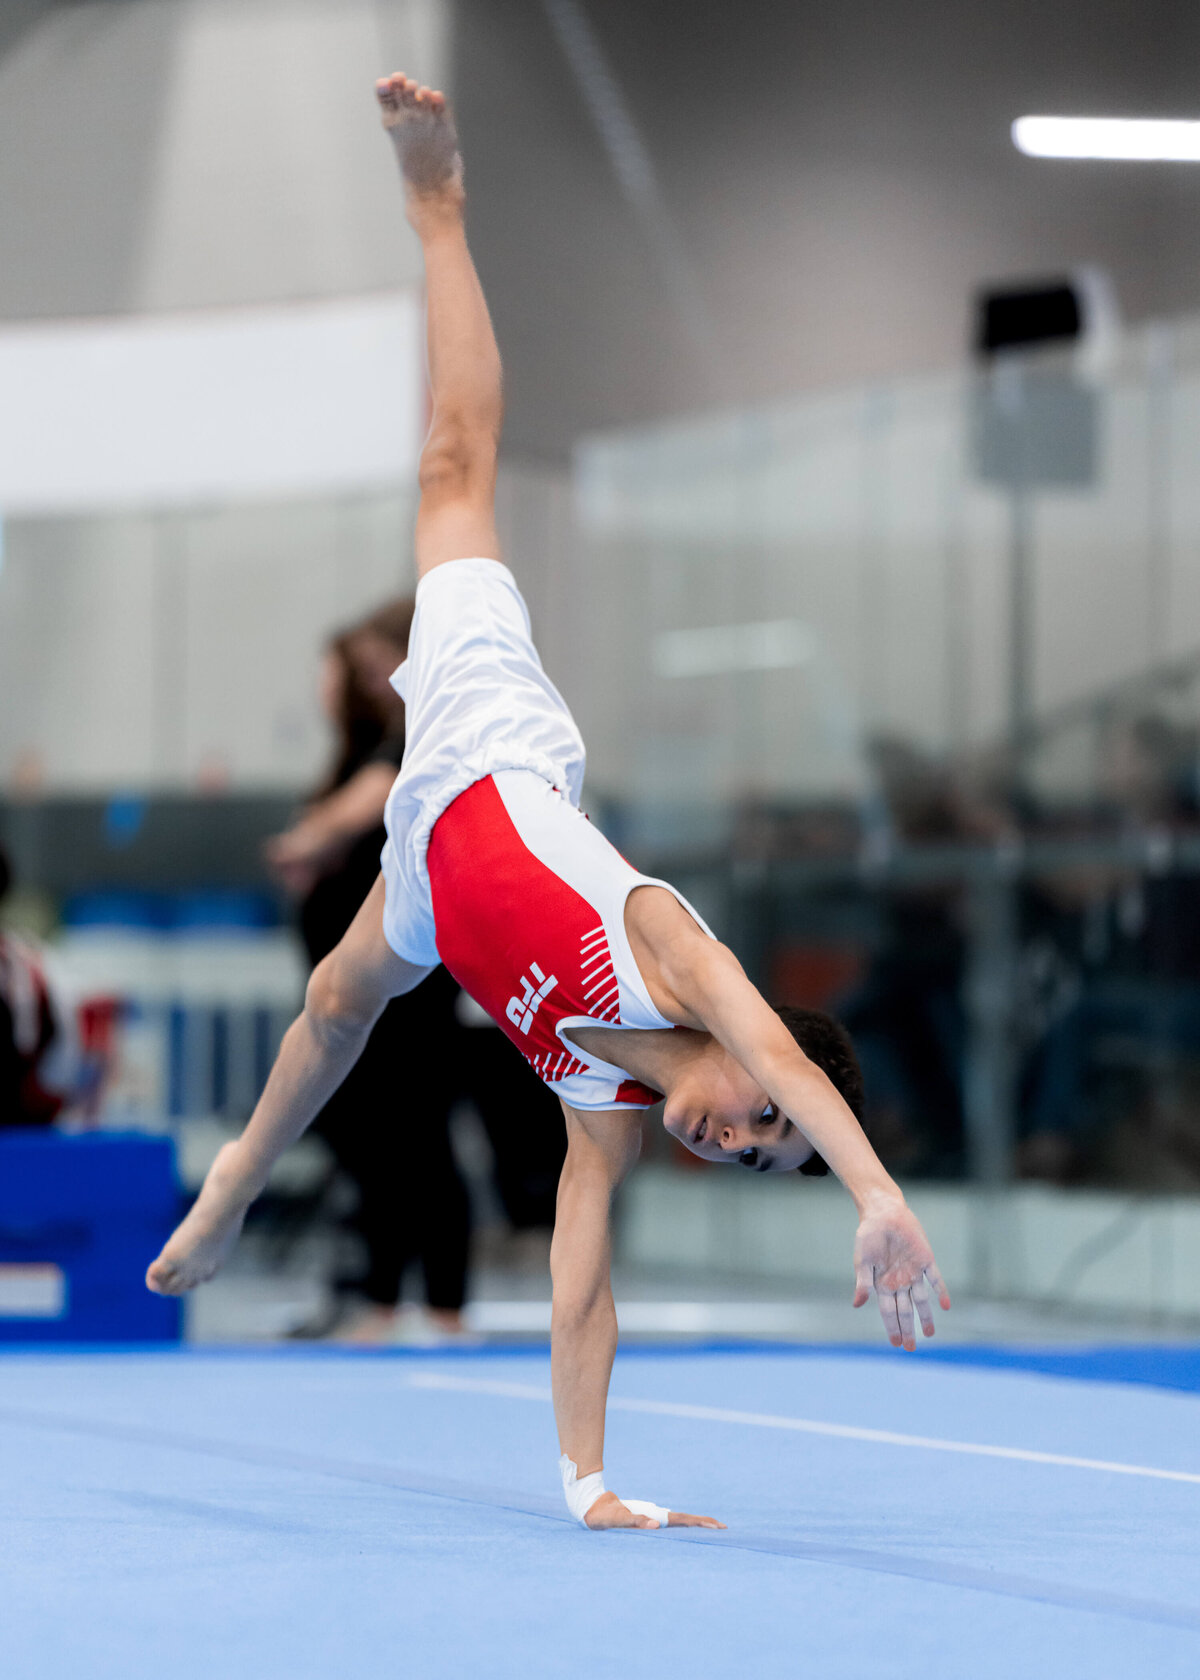 Photo by Luke O'Geil taken at the 2023 inaugural Grizzly Classic men's artistic gymnastics competitionA1_07622